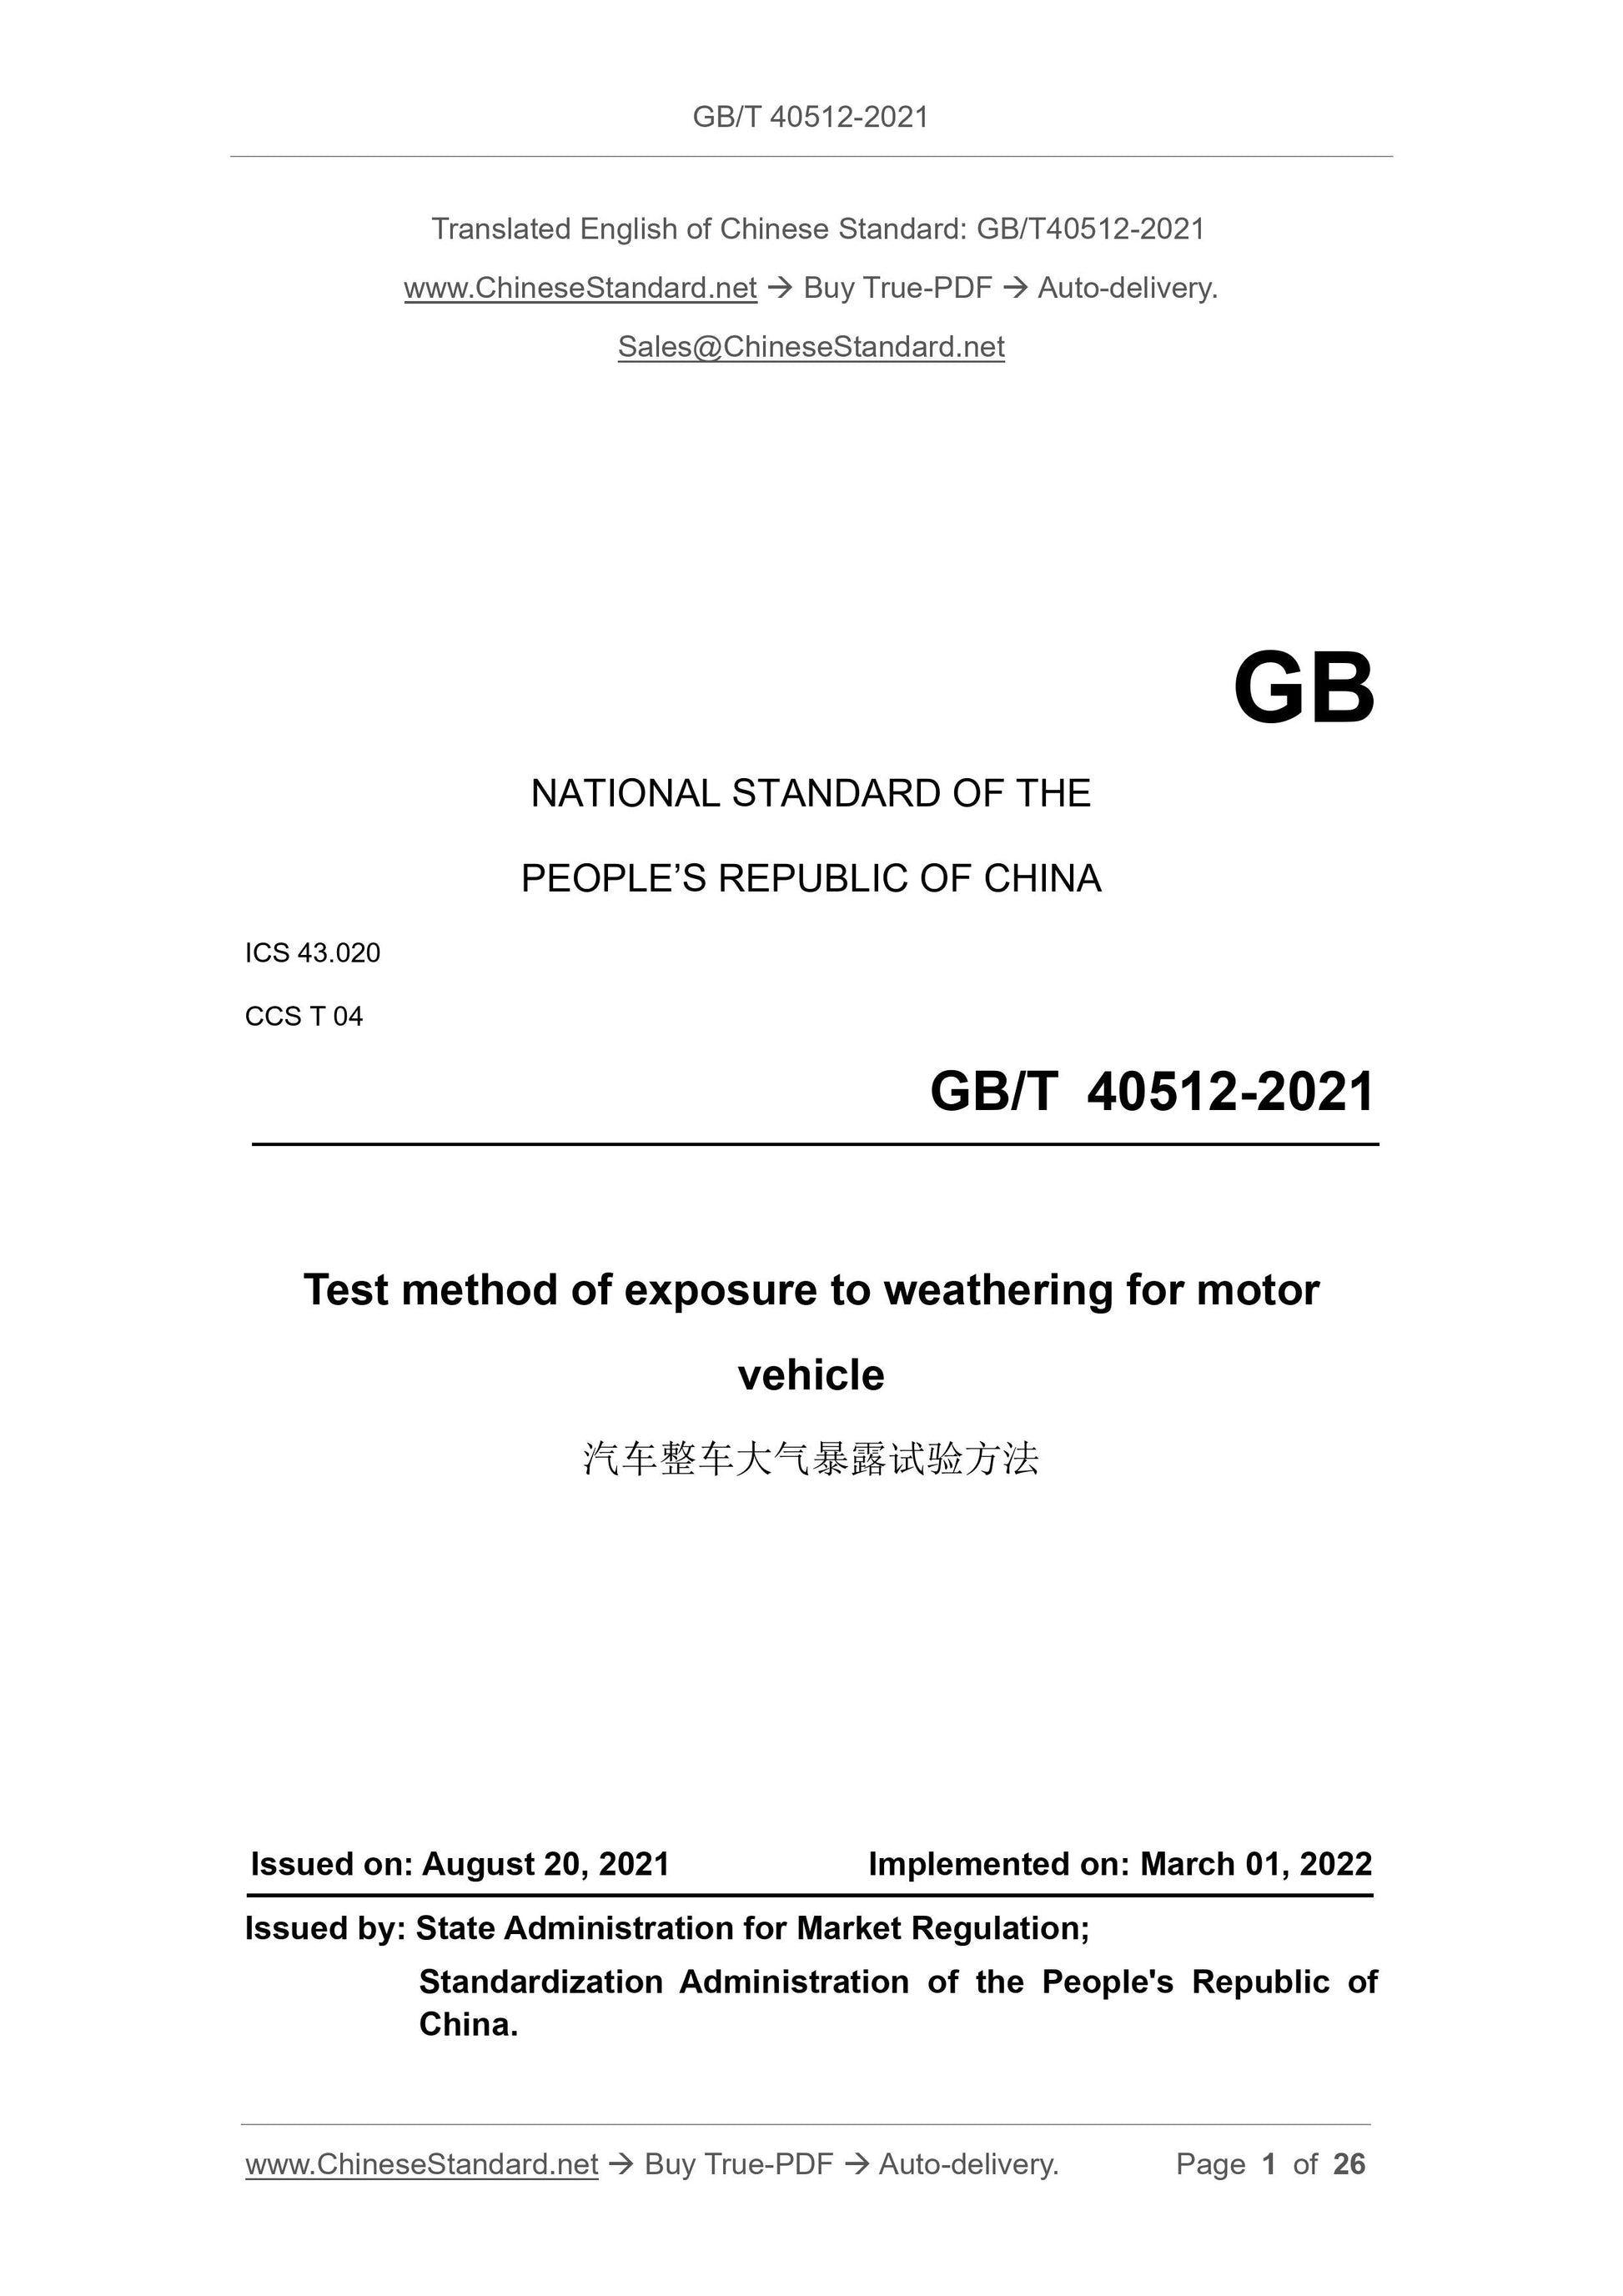 GB/T 40512-2021 Page 1